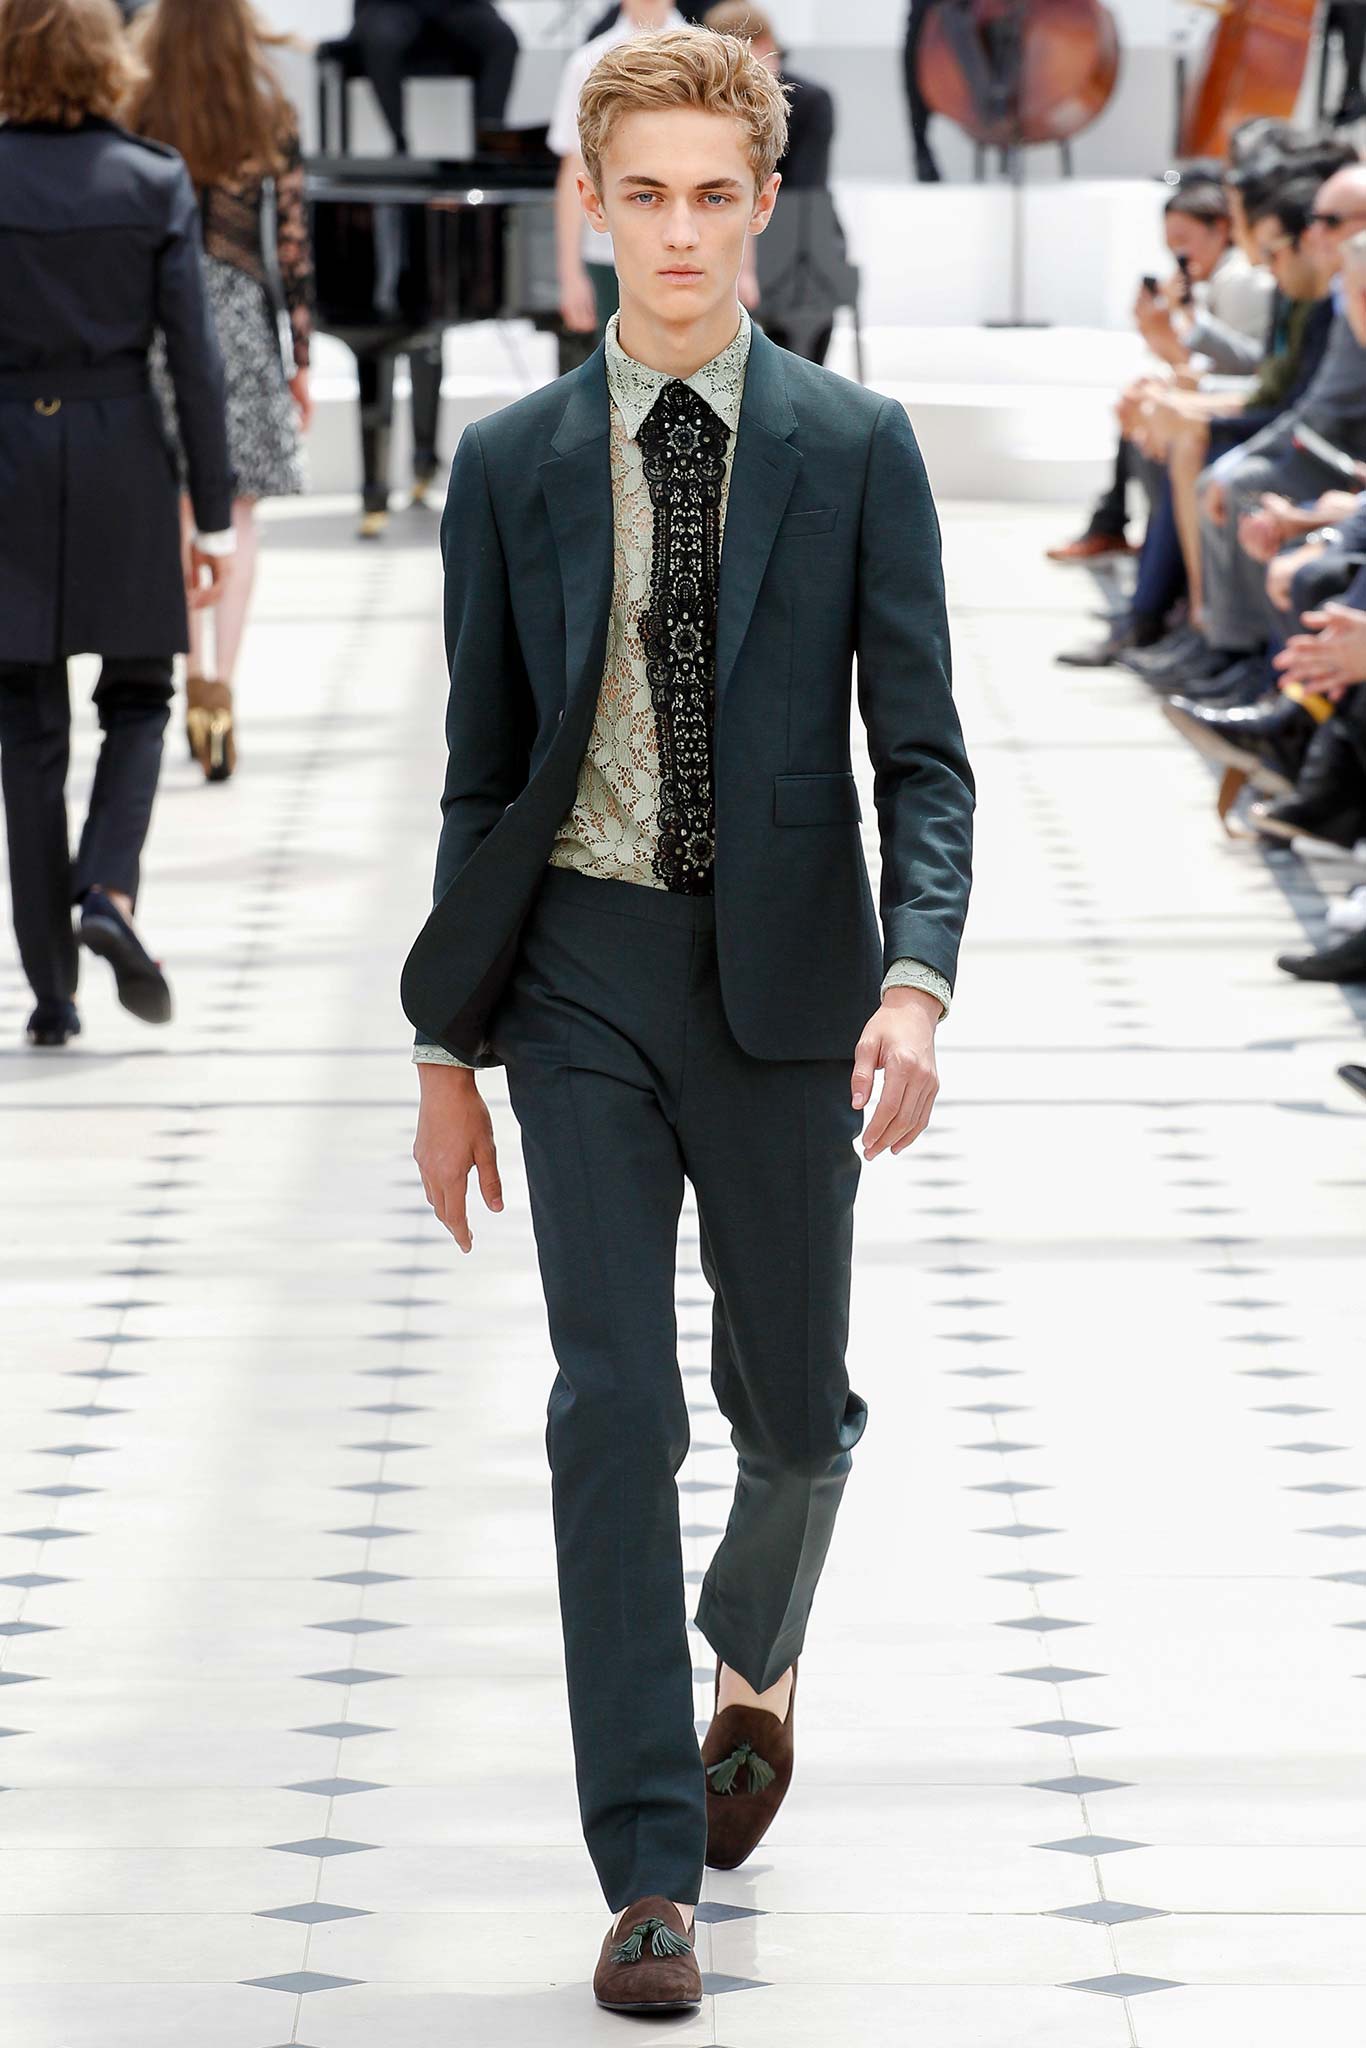 Burberry Prorsum Spring/Summer 2016 - Fashionably Male